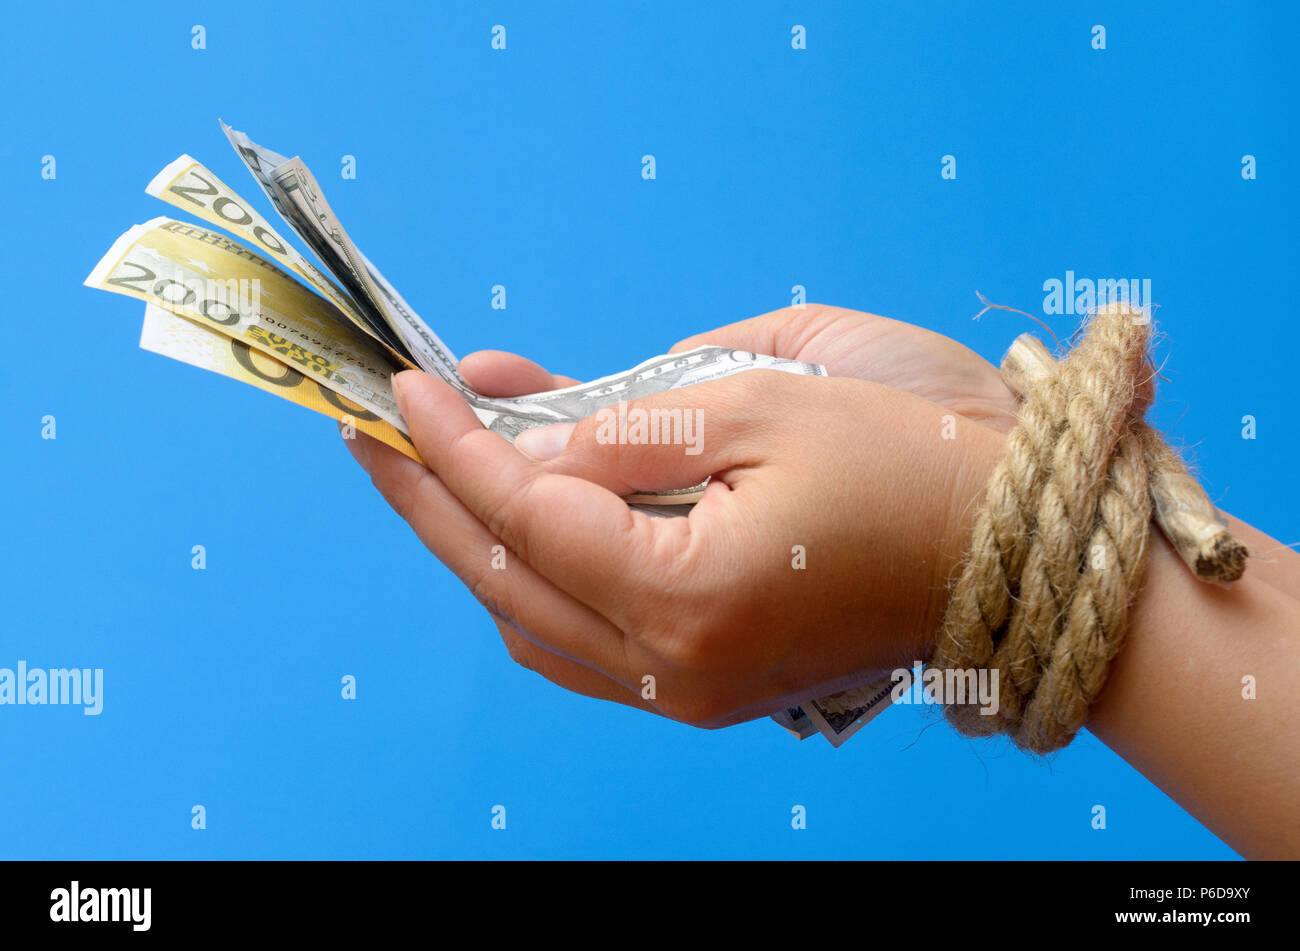 Women's hands tied with a rope and holding money. Credit bondage. Stock Photo